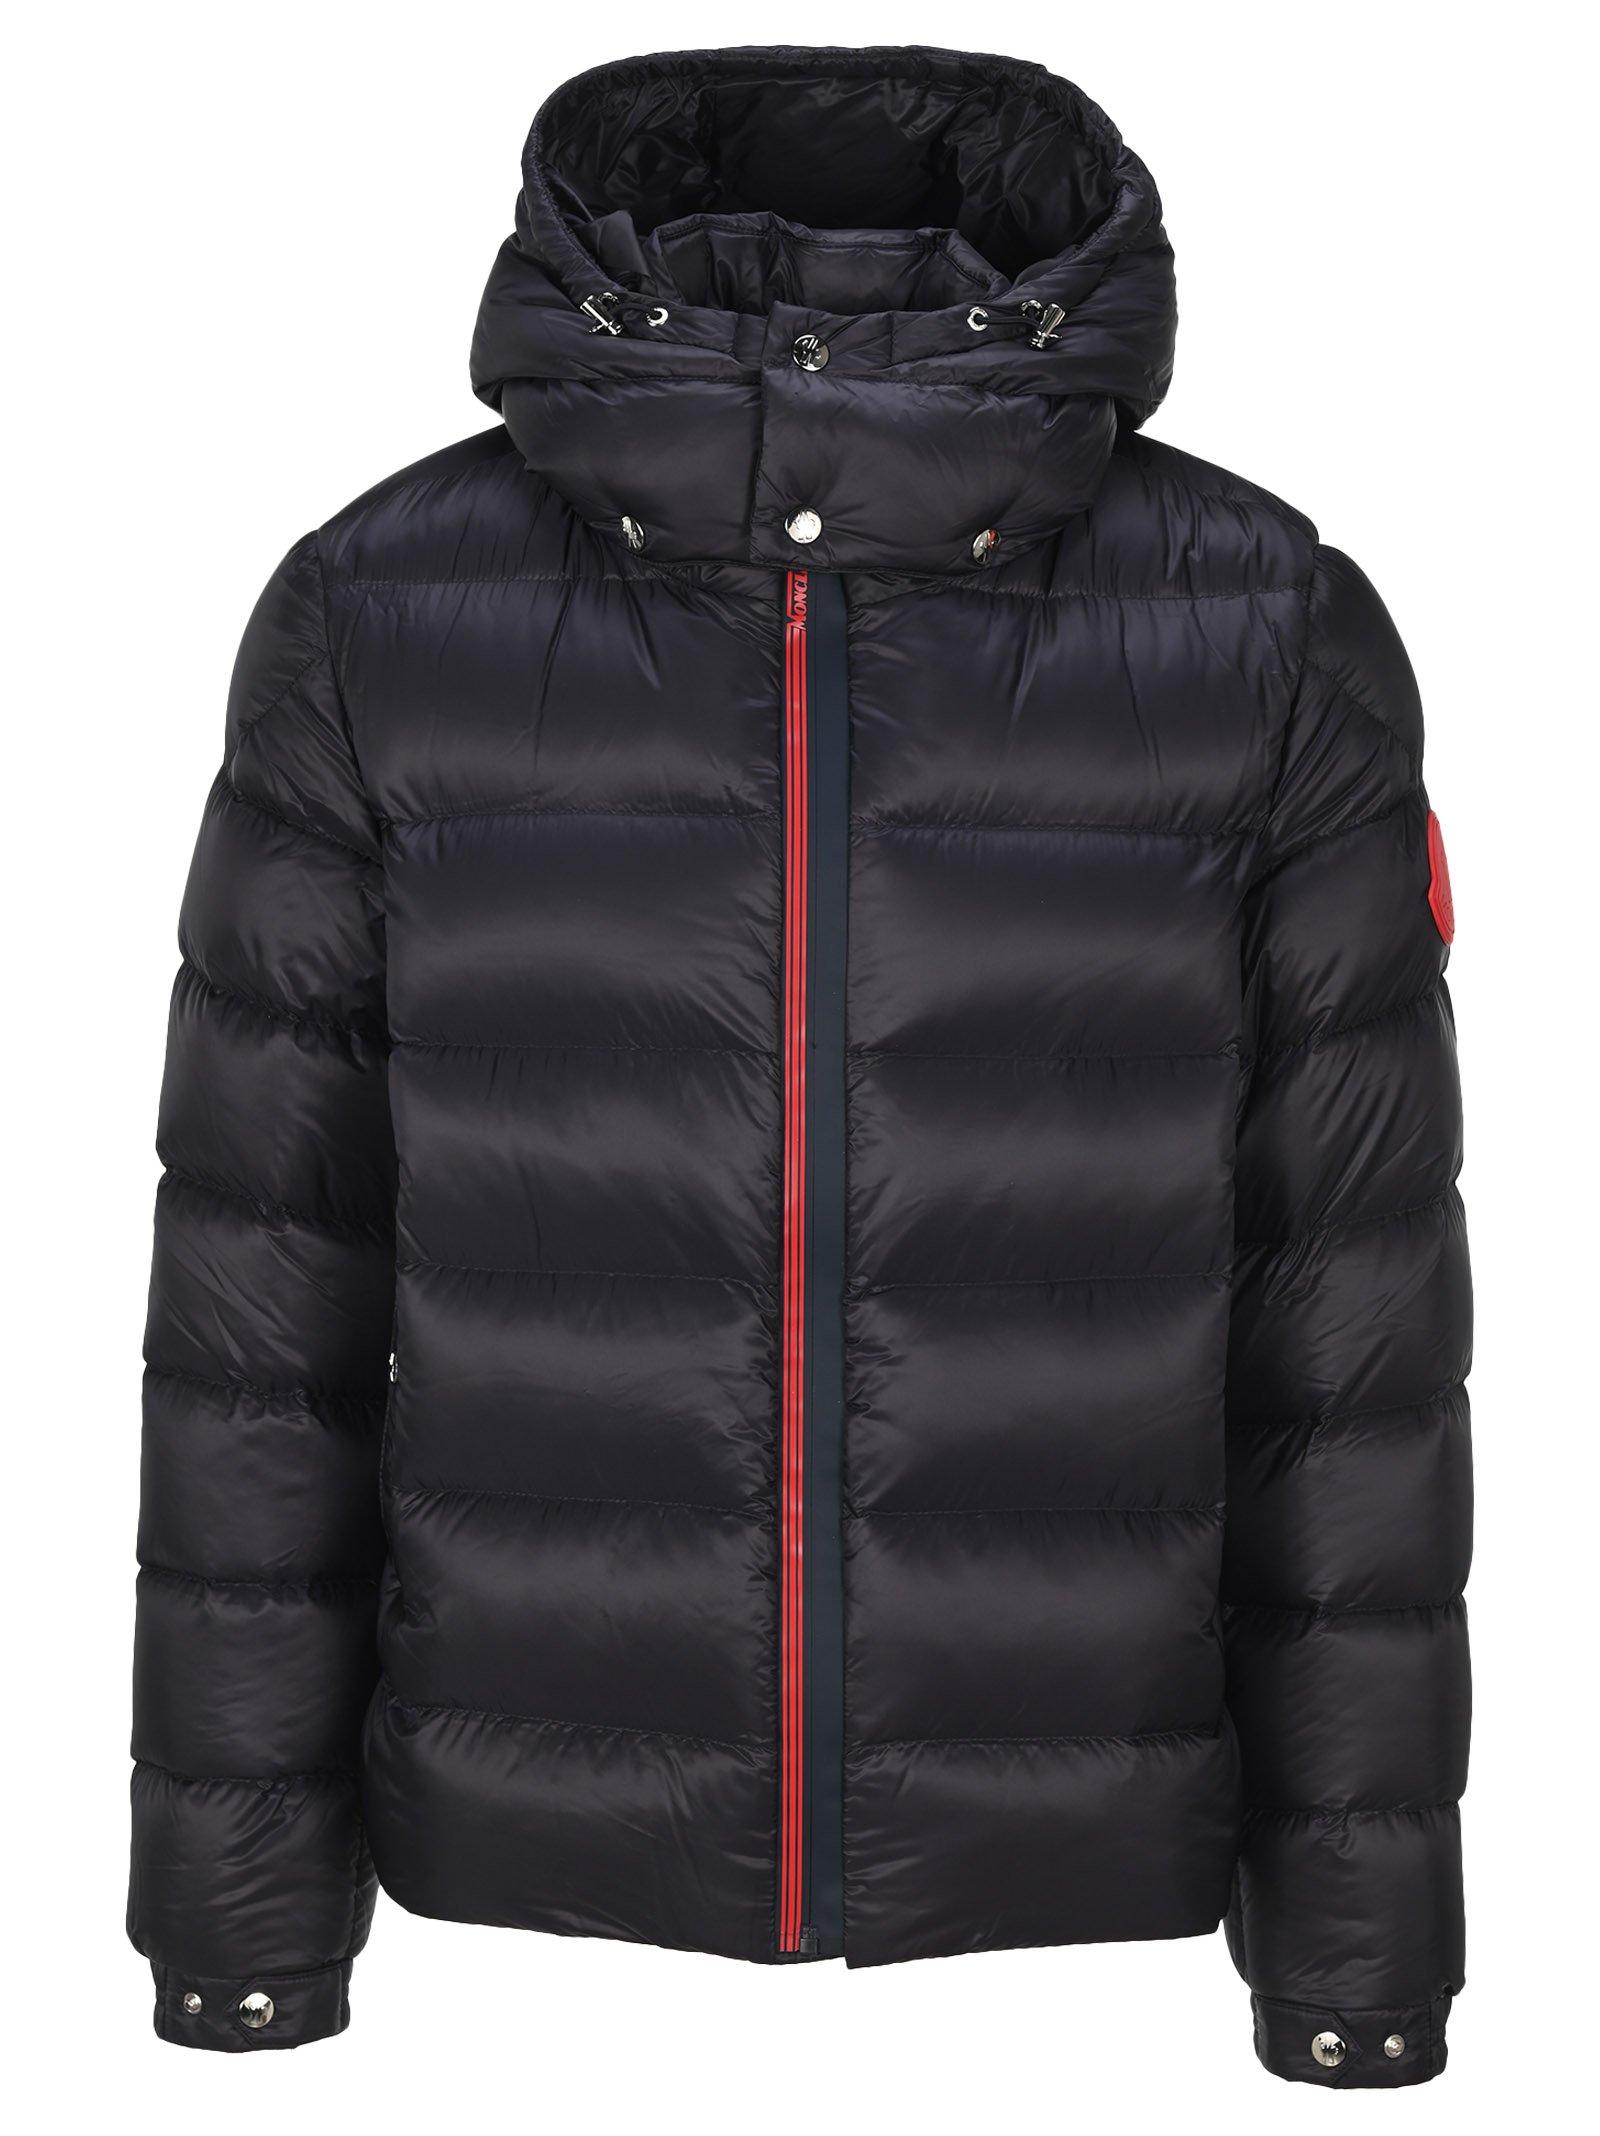 Moncler Synthetic Arves Hooded Down Jacket in Blue for Men - Lyst